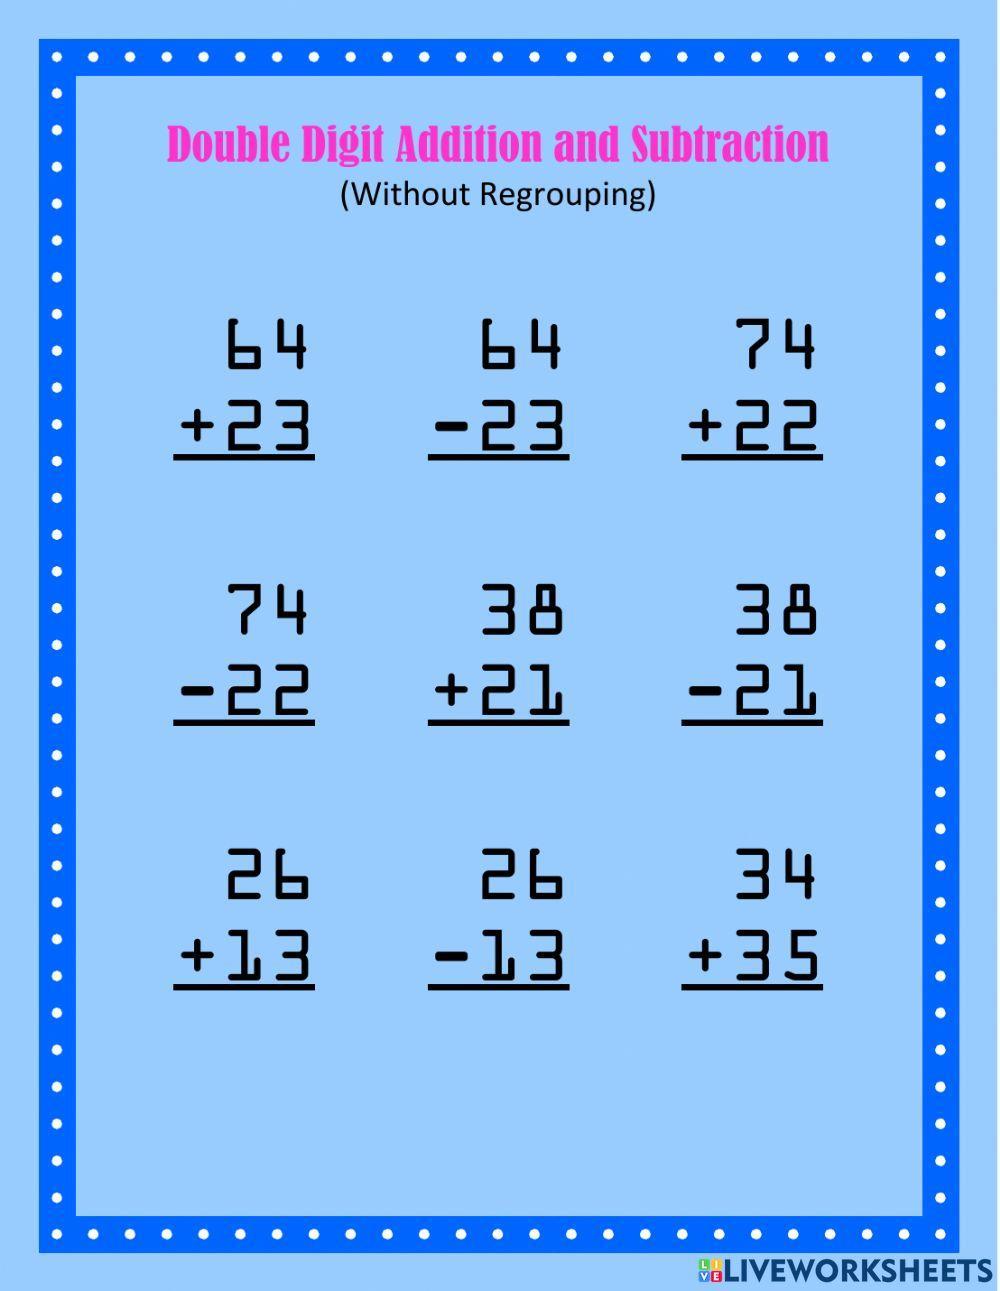 Double Digit Addition and Subtraction Set 2